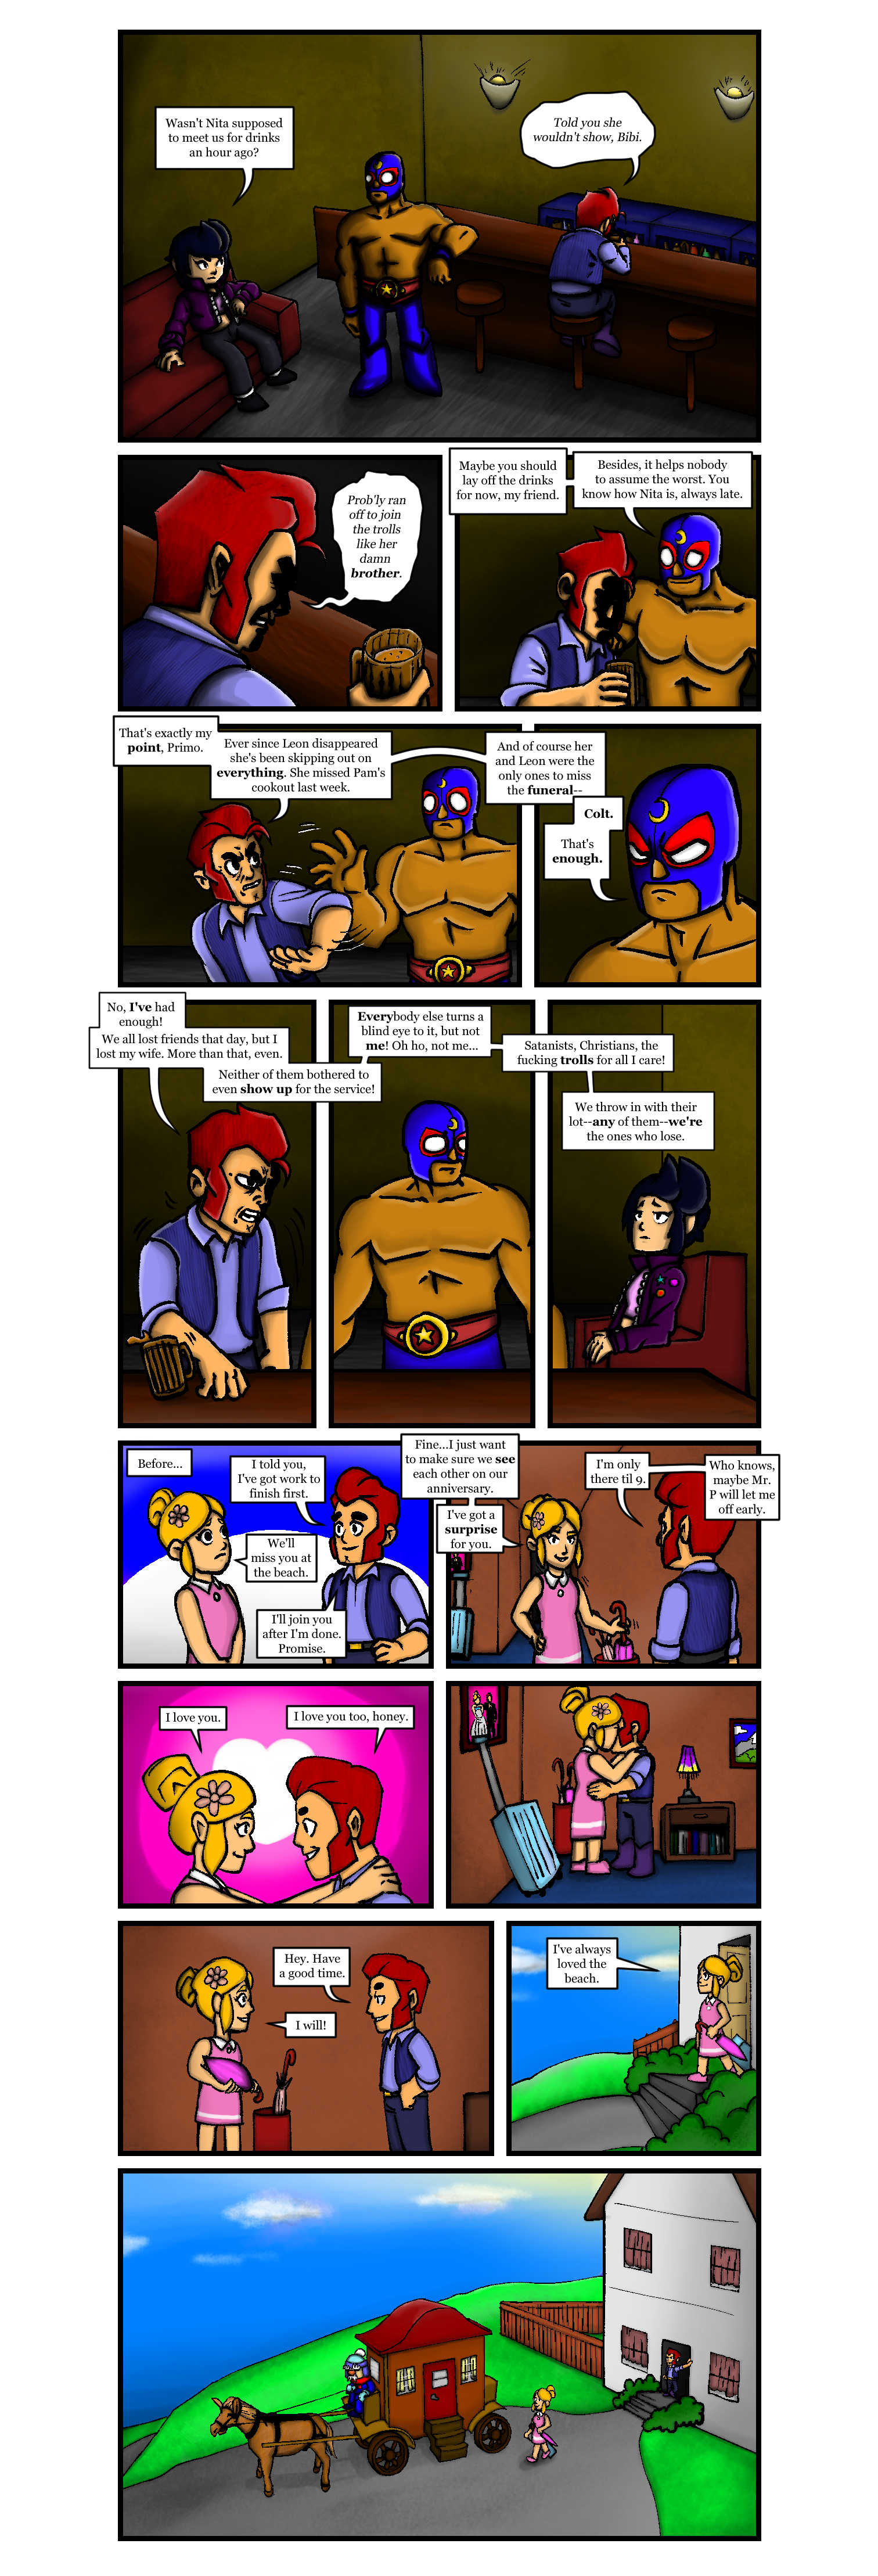 ch27/pg18.png. If you're seeing this, enable images. Or, perhaps we have a website issue. Try refreshing, if unsuccessful email c@commodorian.org with a detailed description of how you got here.